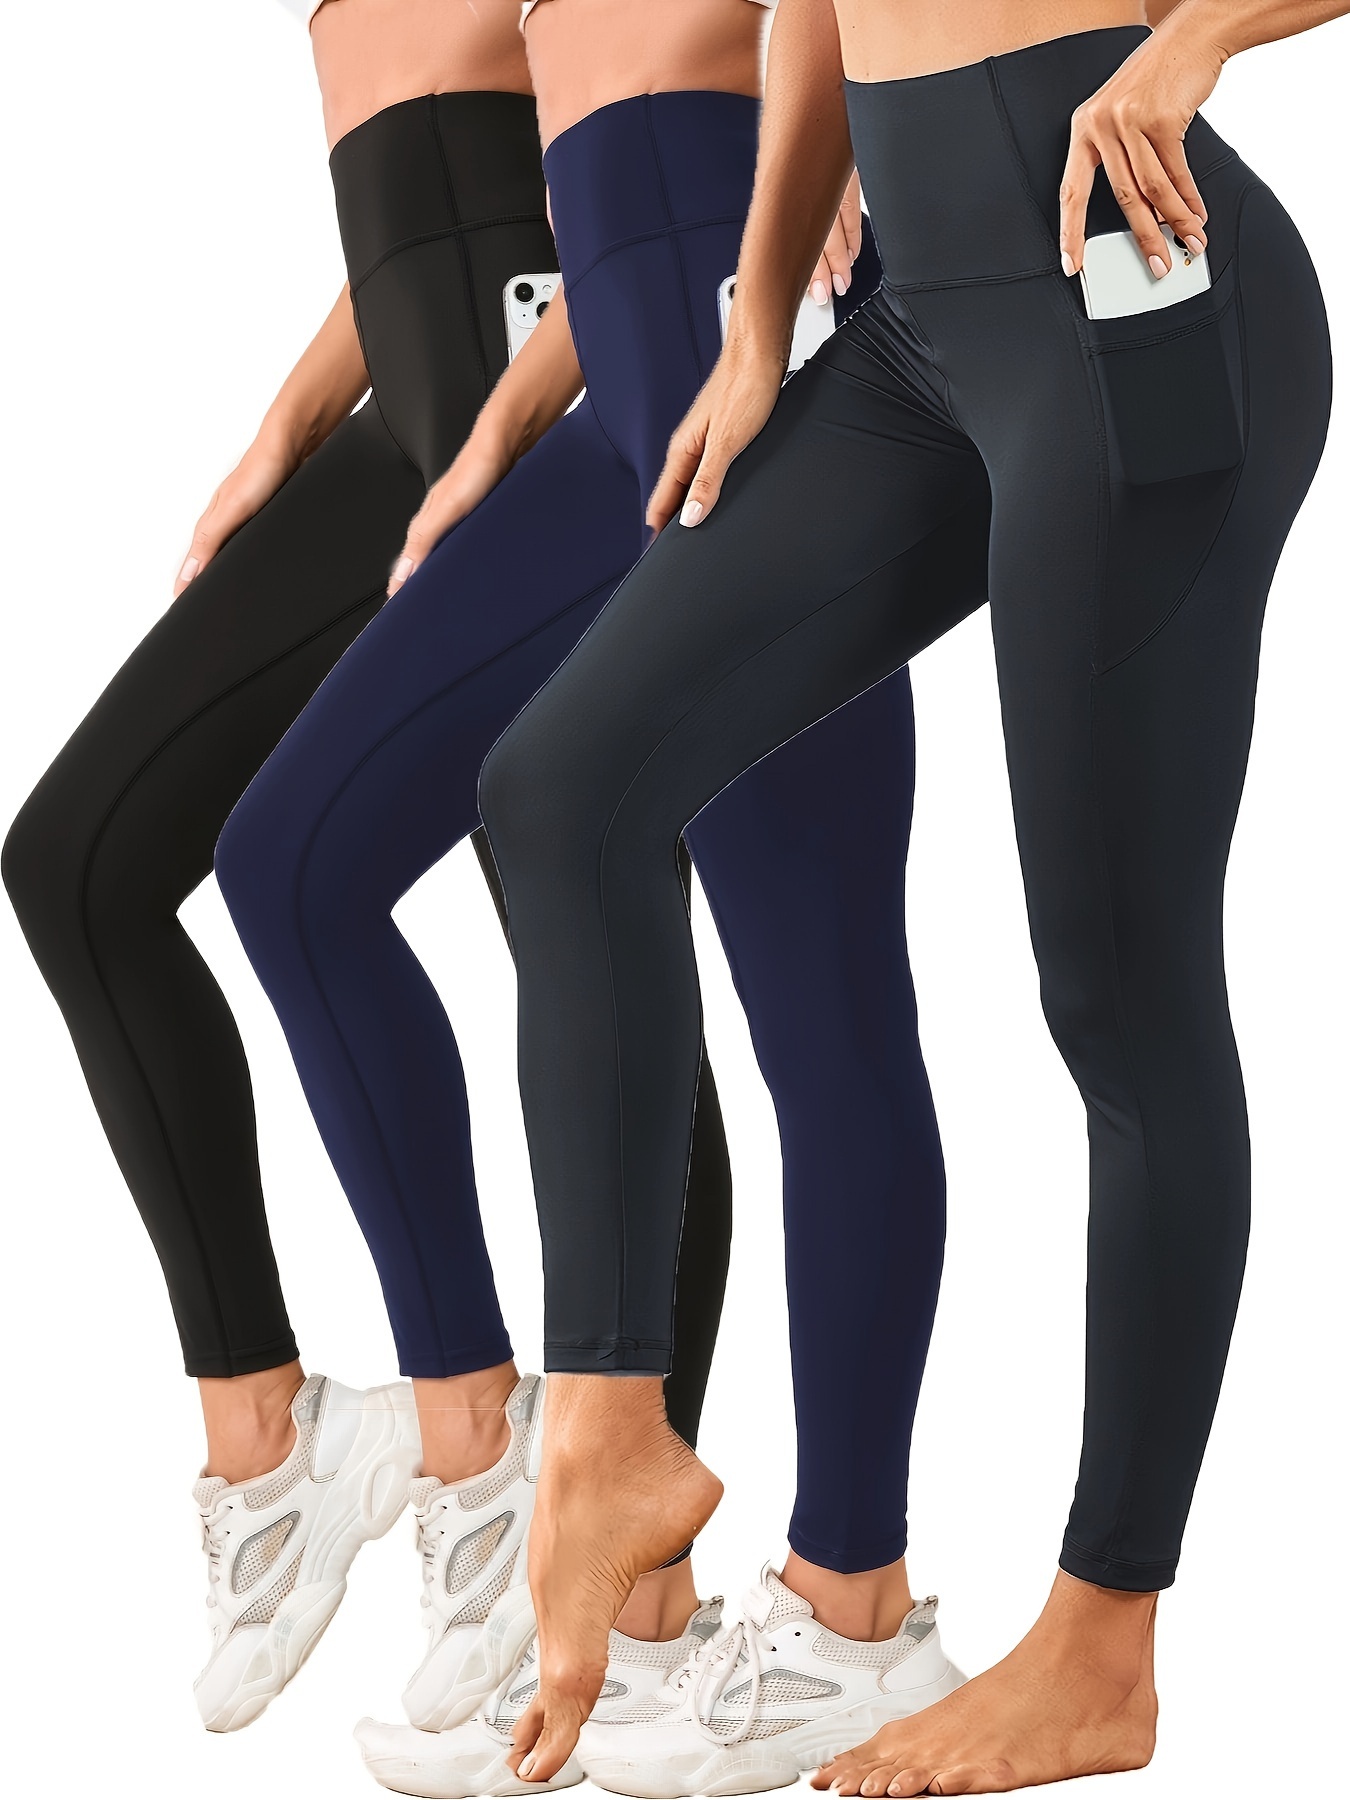 High Waist Athletic Offline Yoga Pants For Women And Girls Perfect For  Running, Gym, And Workouts From Esfb, $15.85